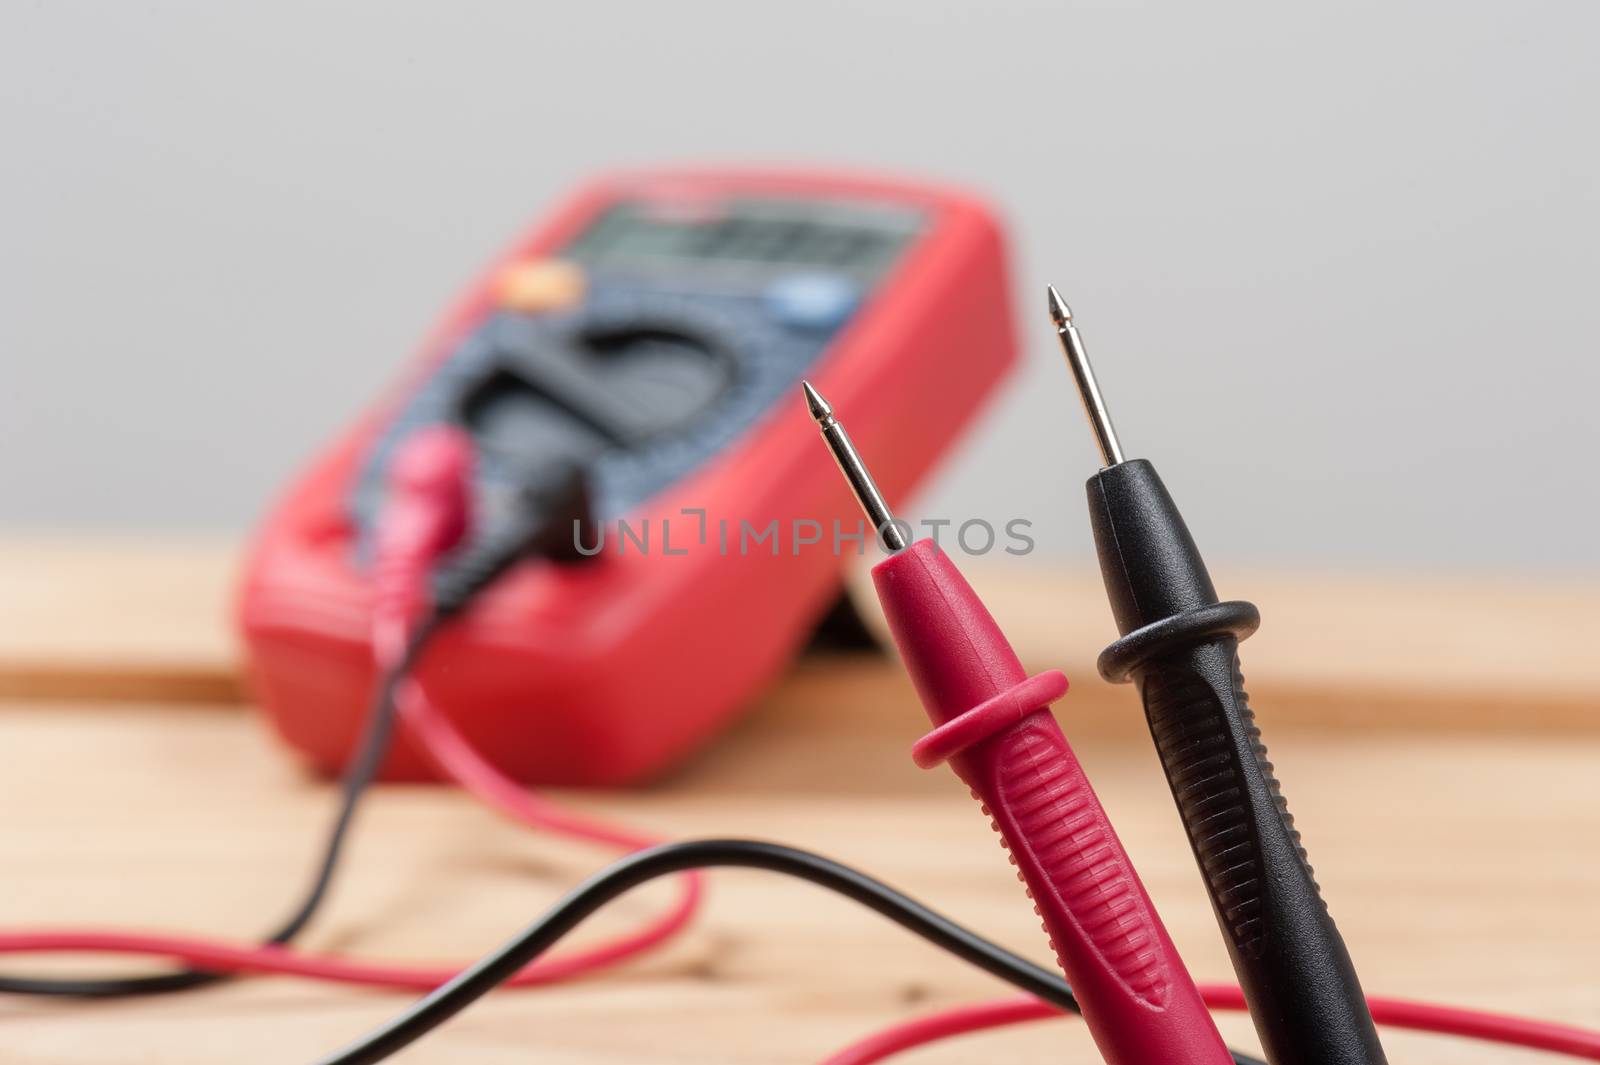 digital multimeter or multitester or Volt-Ohm meter (closeup at test leads), an electronic measuring instrument that combines several measurement functions in one unit.